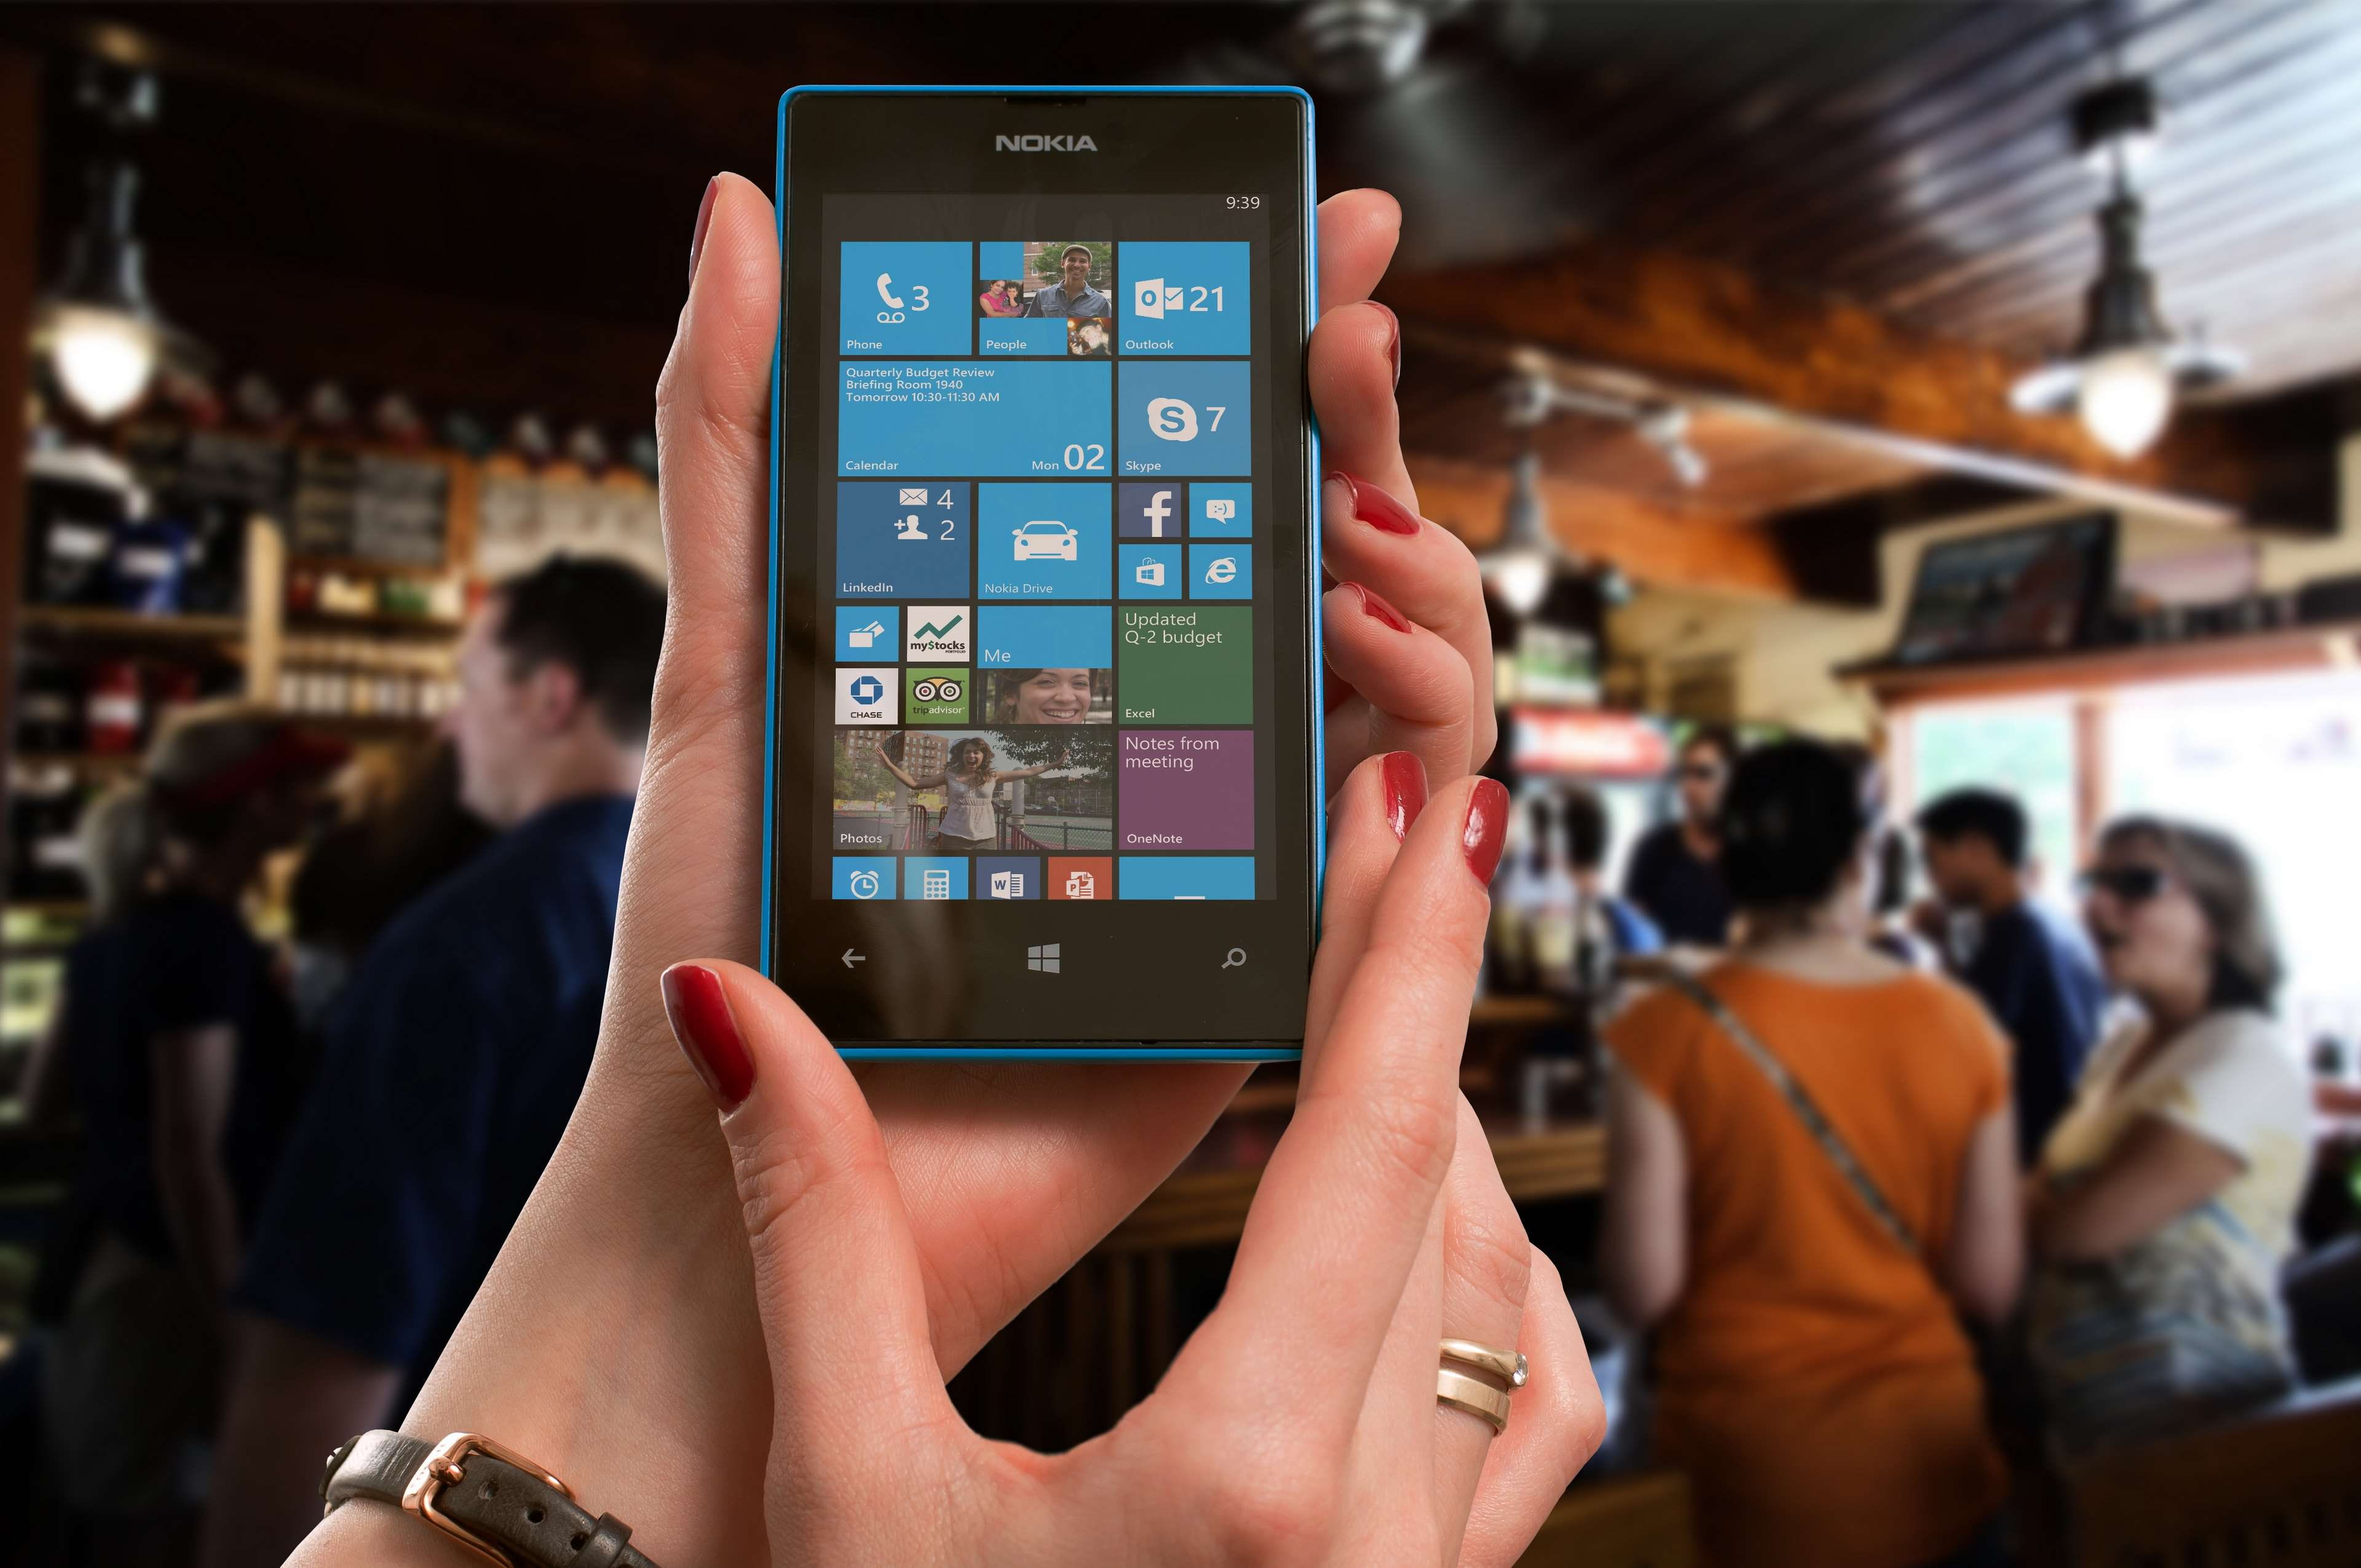 apps, cellphone, hands, lumia, microsoft, mobile, mobile phone